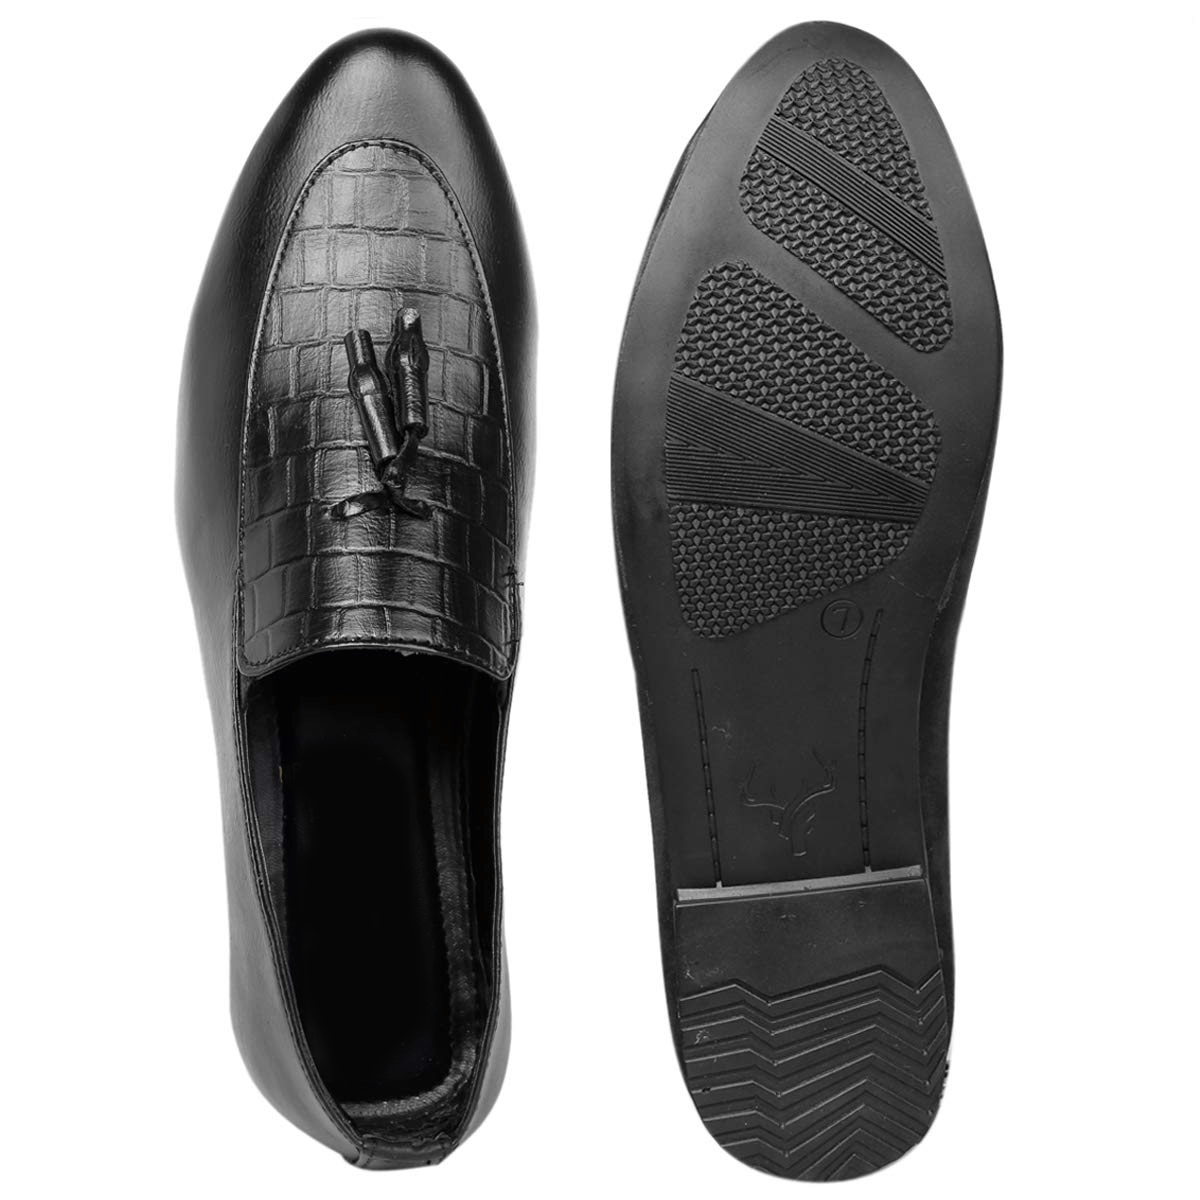 Basic Design Casual Pu Leather Tassel Loafer & Moccasins Shoes For Men's-Unique and Classy